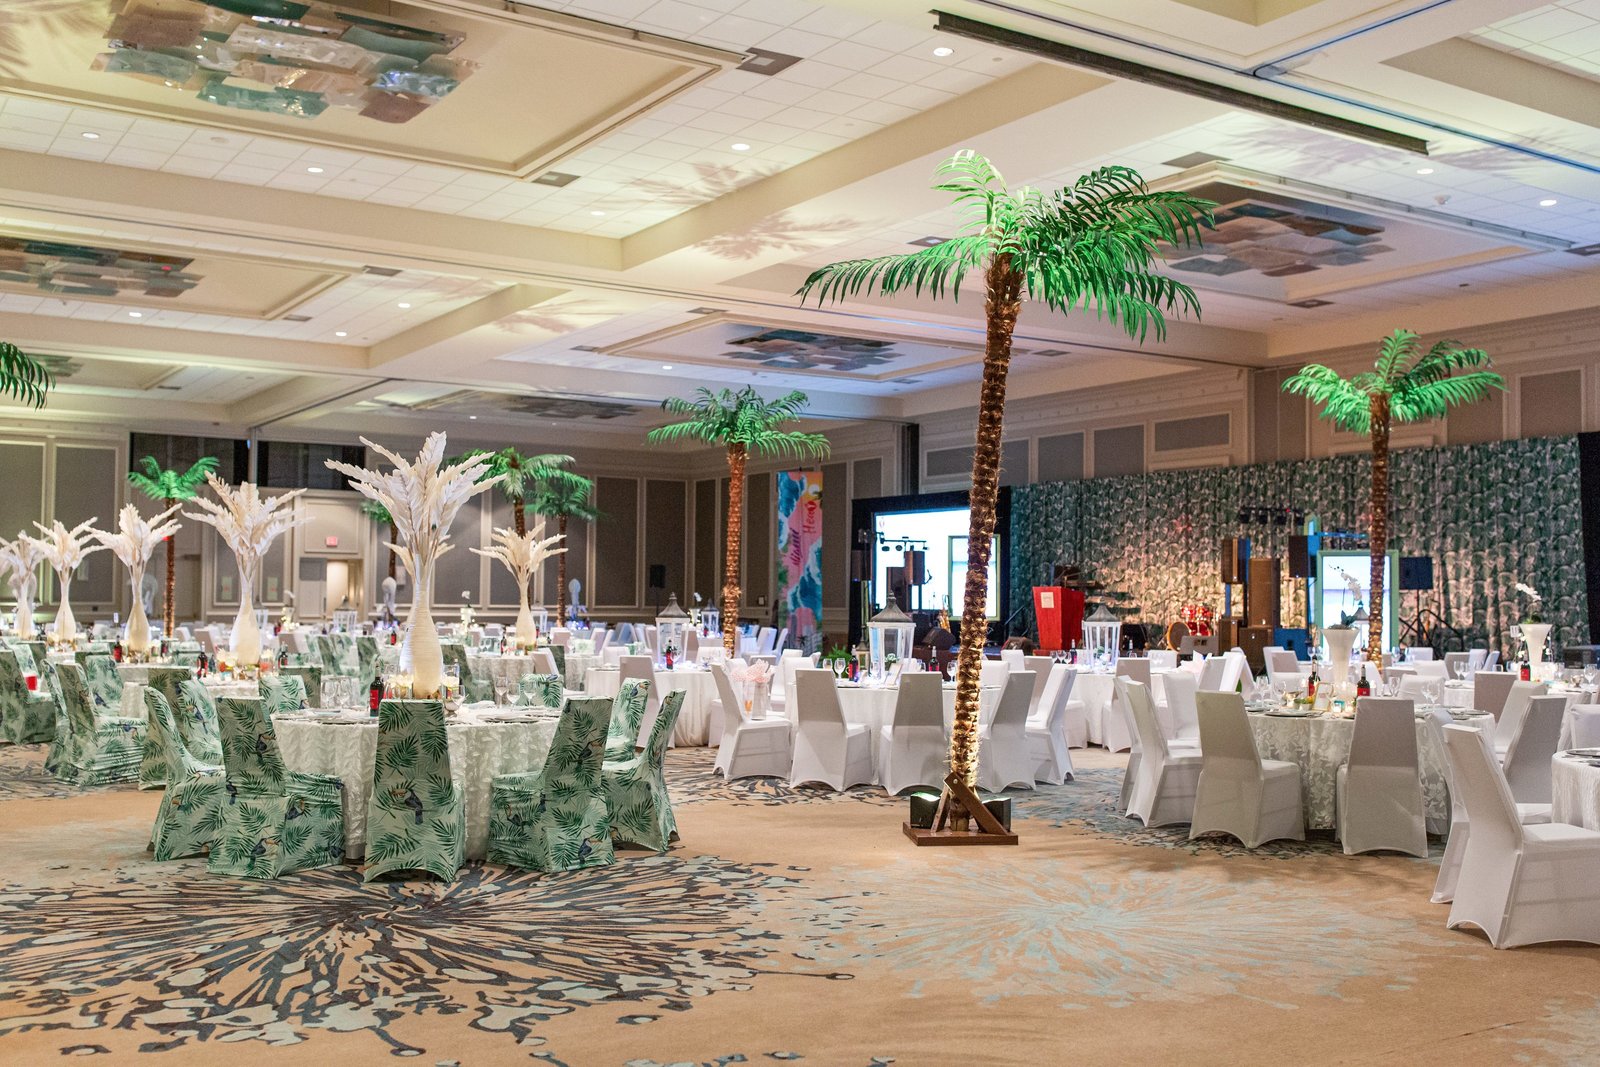 inside of a ballroom decorated for a gala